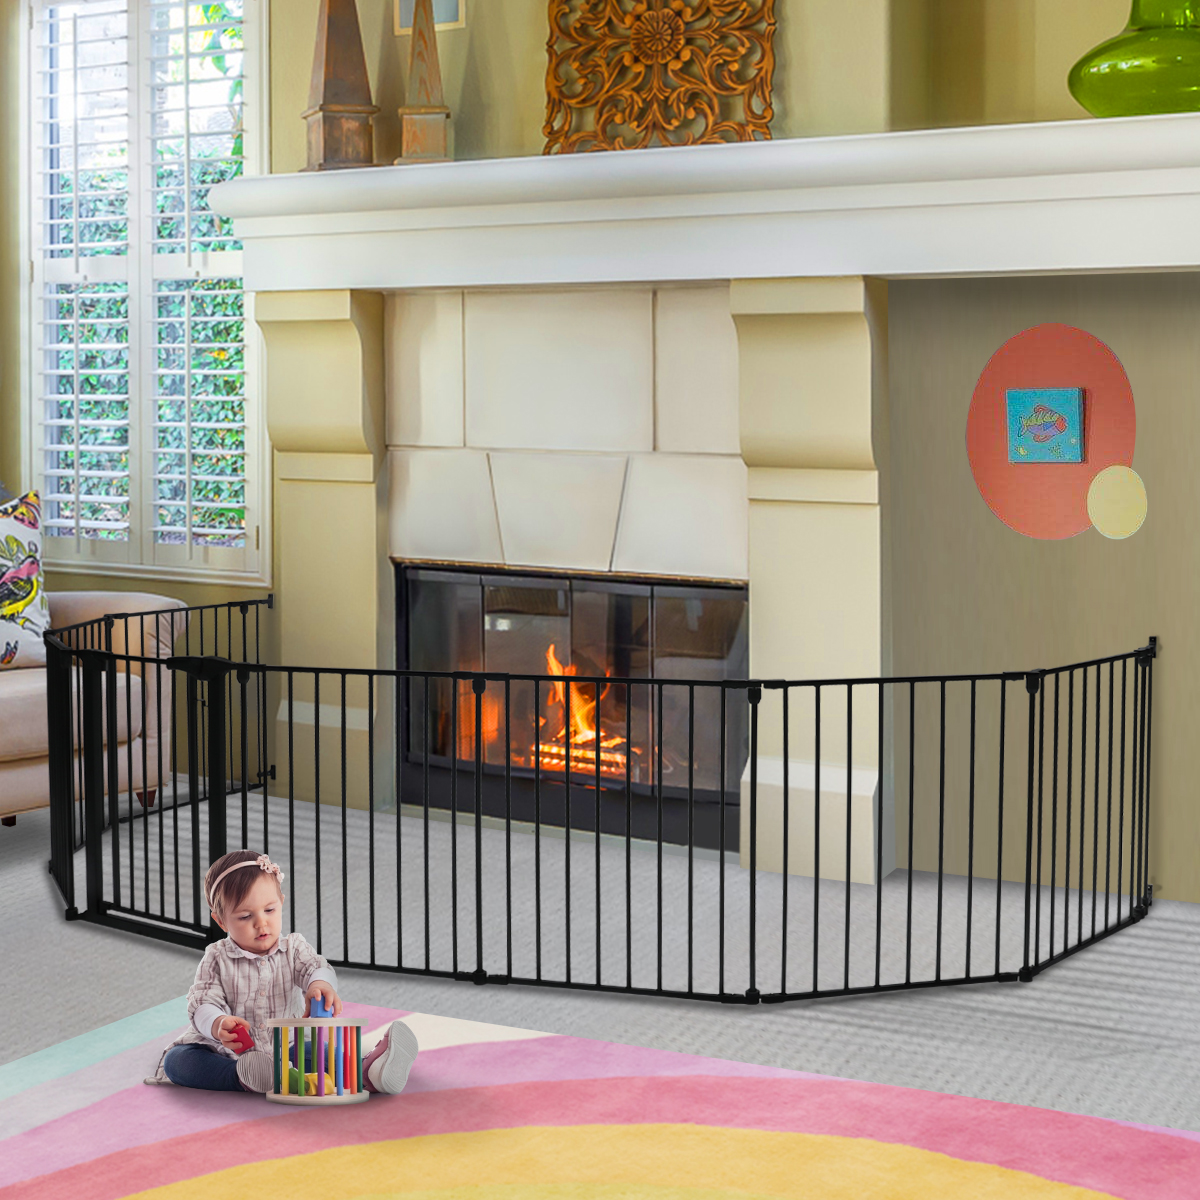 Comomy-198-inch-Long-Baby-Gate-Extra-Wide-Baby-Gate-Play-Yard-8-Panel-Foldable-Safety-Gate-for-Pet-C-1933282-5